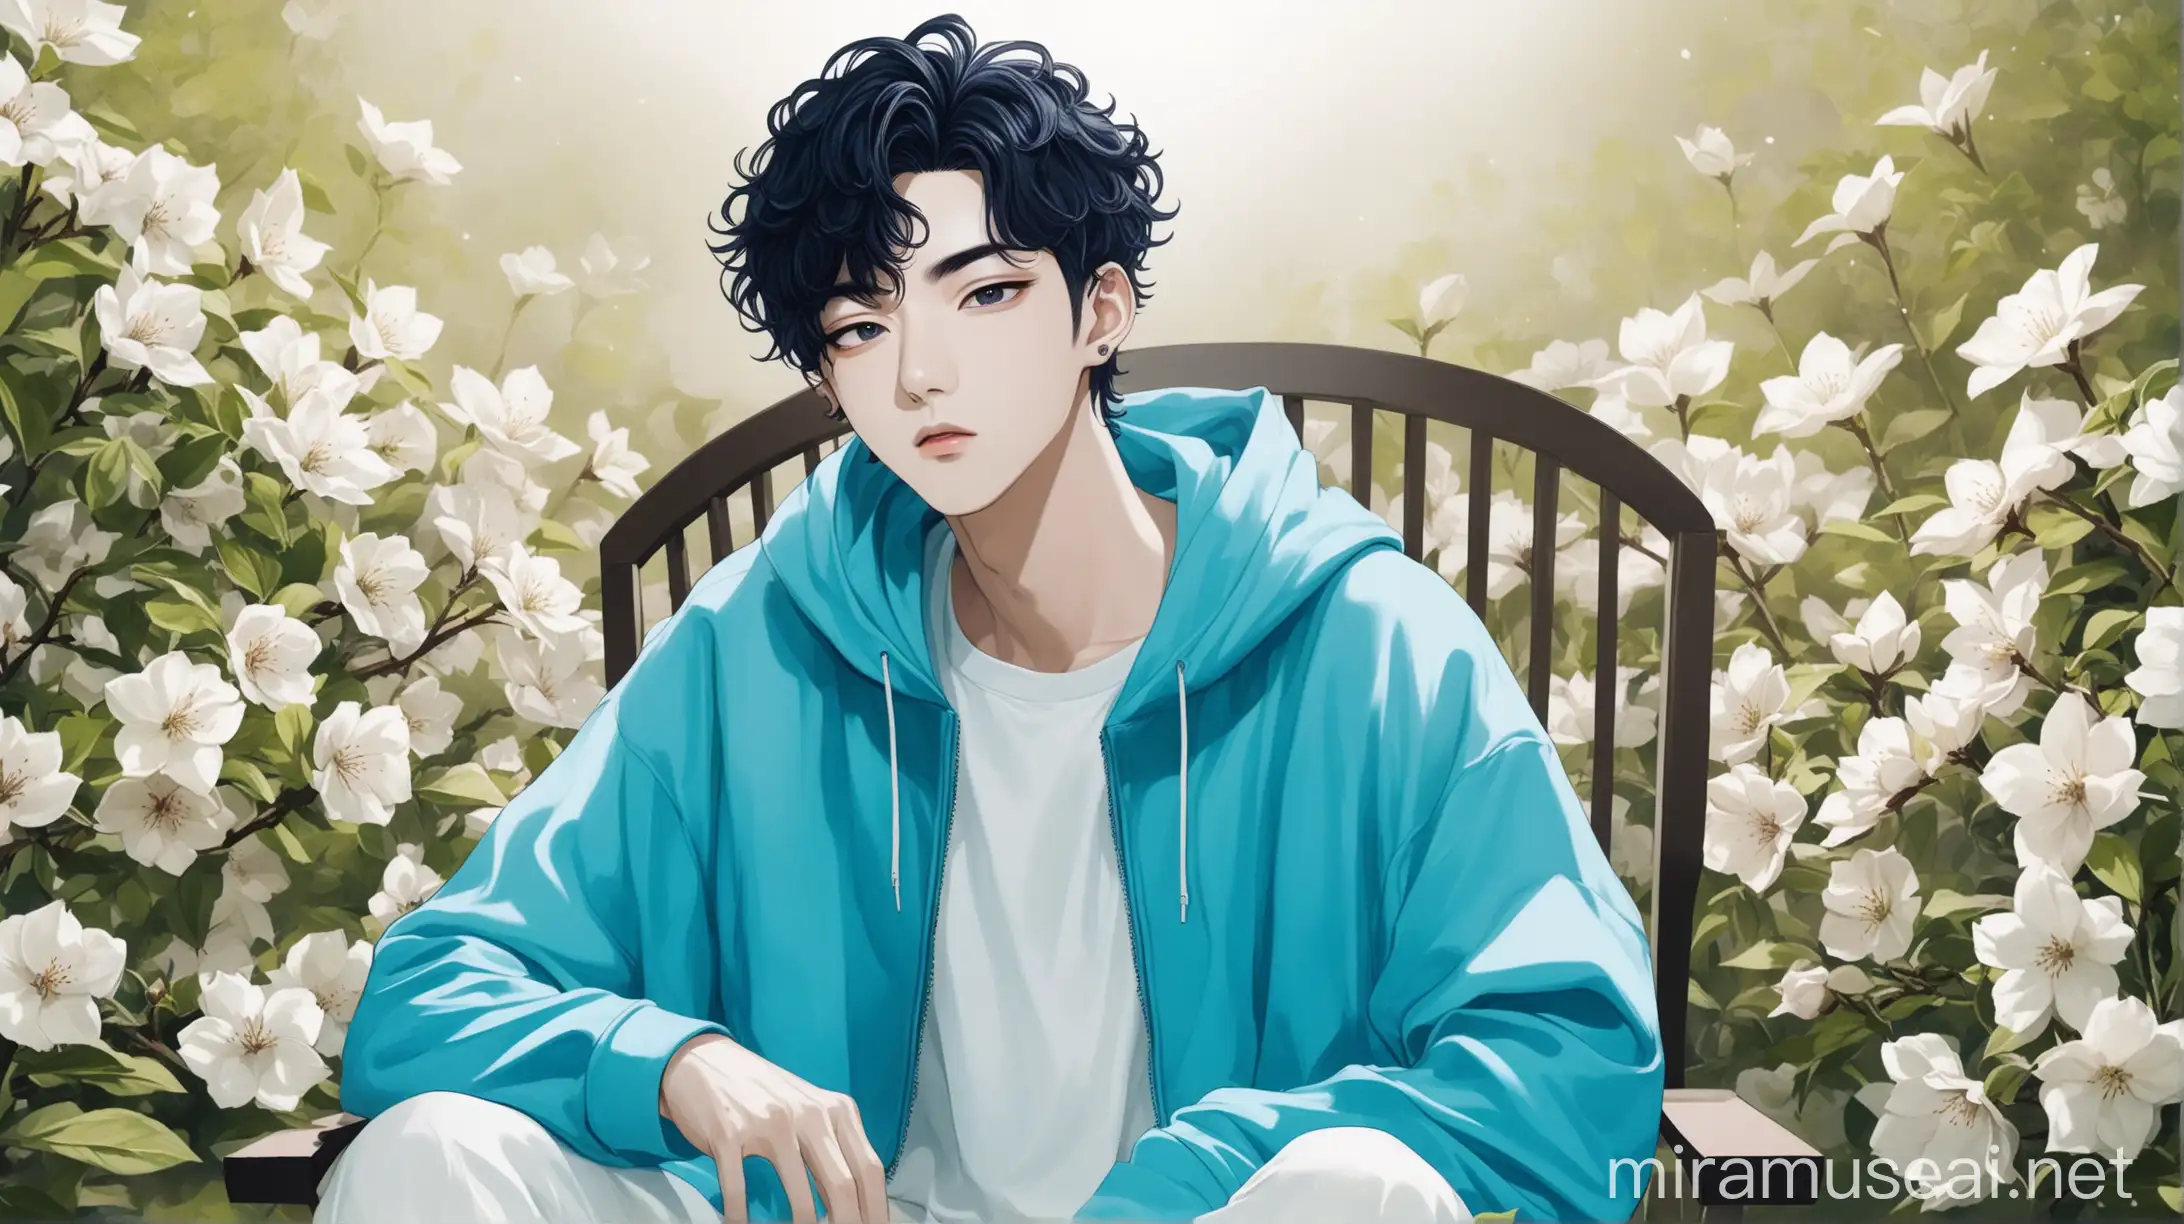 A sexy cool looking Korean kpop male idol, facial features: (black curly short hair, silver eyes, straight nose, monolid almond upturned eyes, oblong face, straight eyebrows eyebrows )Wearing blue hoddie jacket and plain white tshirt and pant sitting in chair, singing in a beautiful aesthetic flower garden 